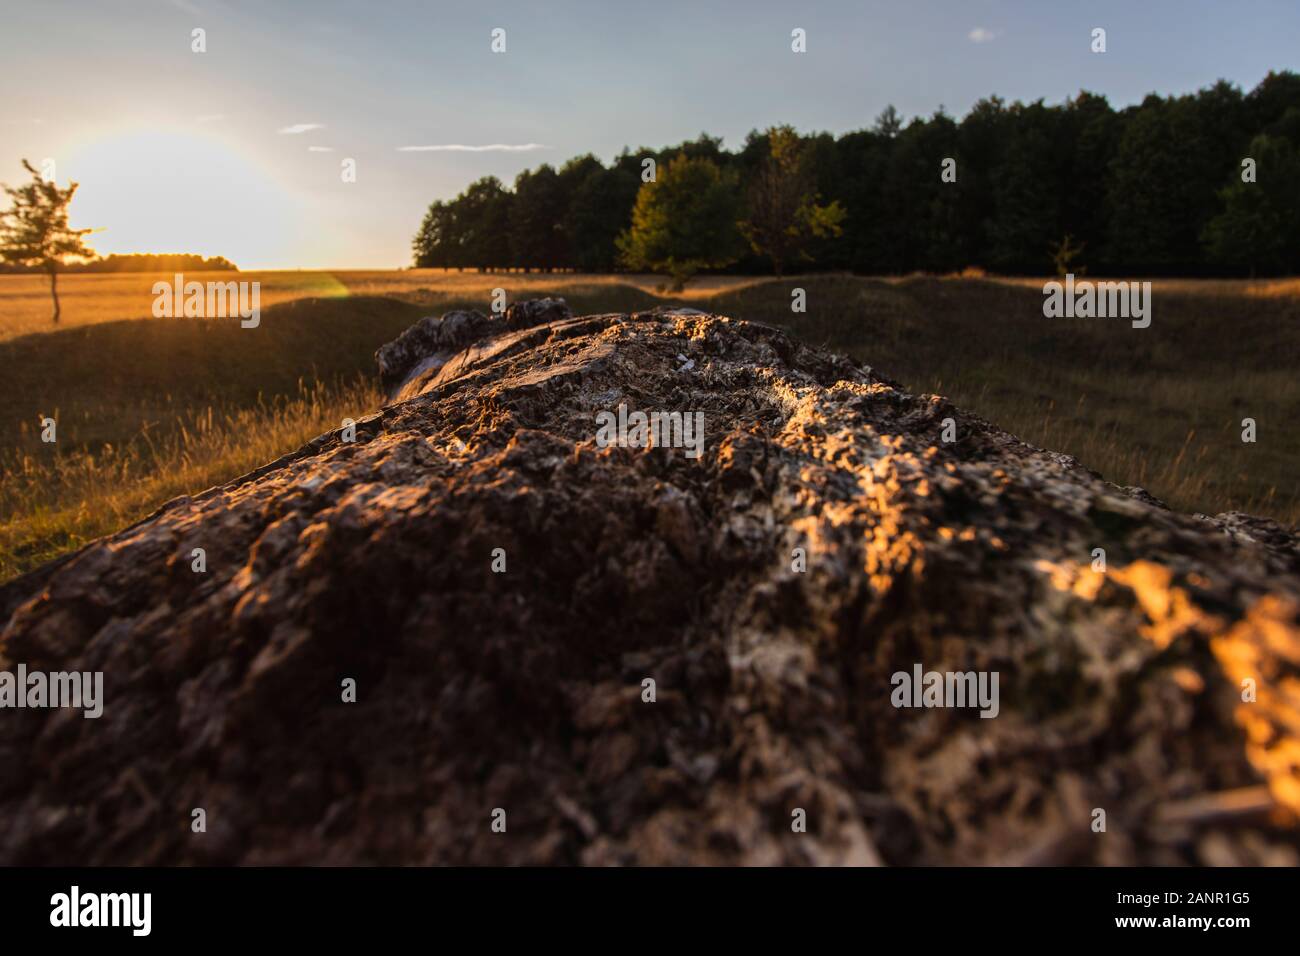 closeup of a big stone in front of a field and forest Stock Photo